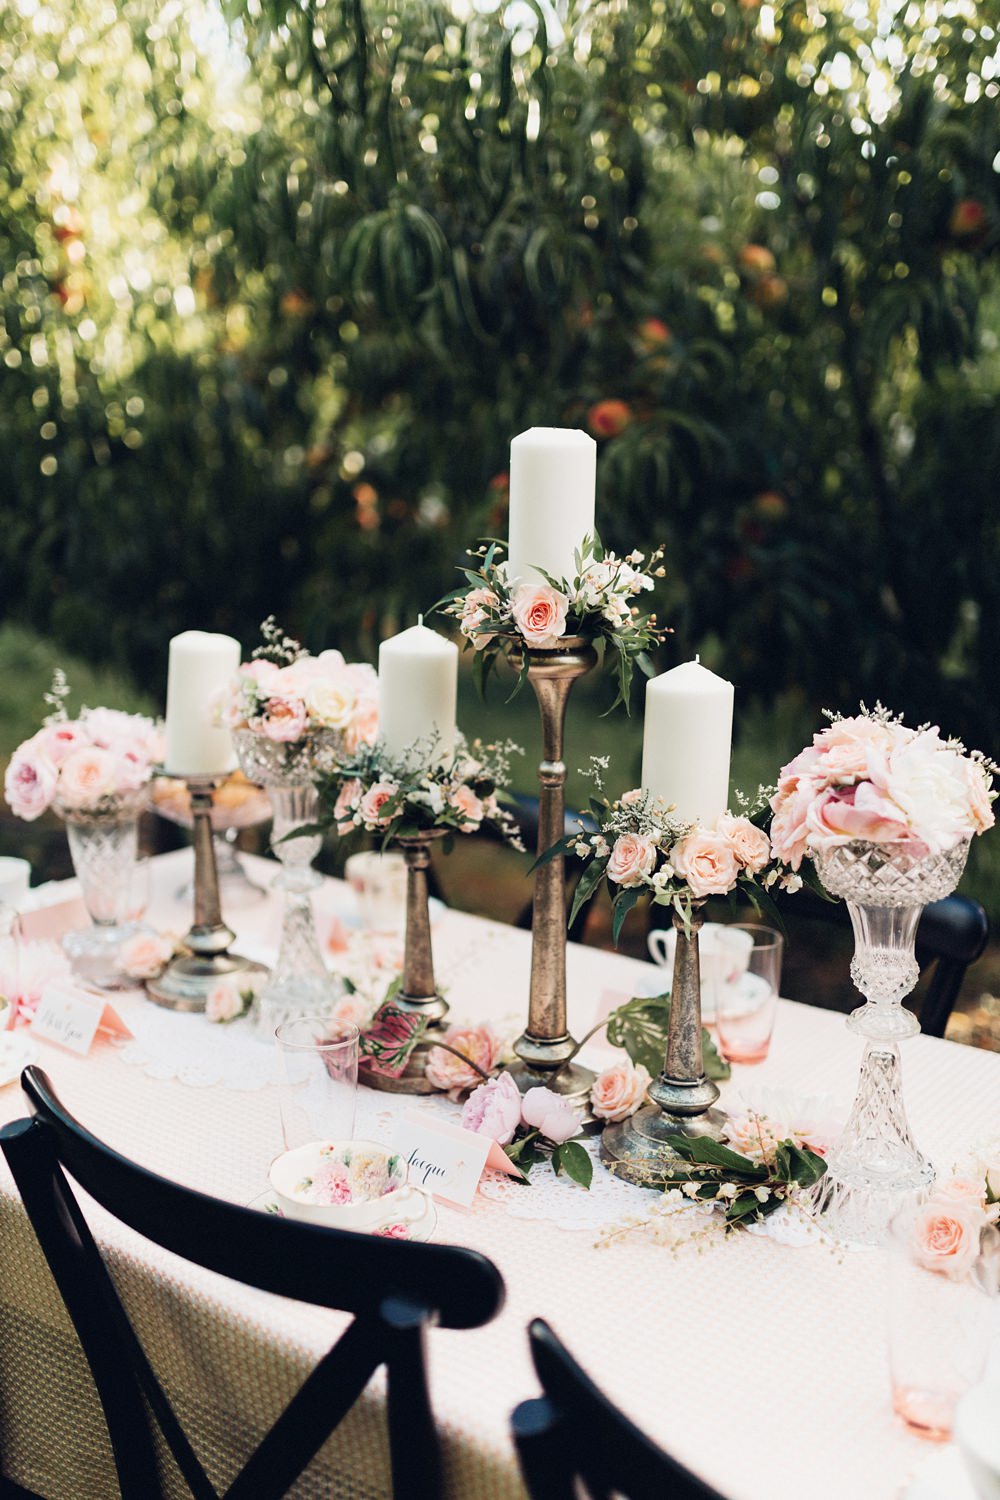 Romantic Blush Garden Wedding Centerpiece Decoration with Candles and Roses // 15 Stunning Ways to Decorate with Candles // https://mysweetengagement.com